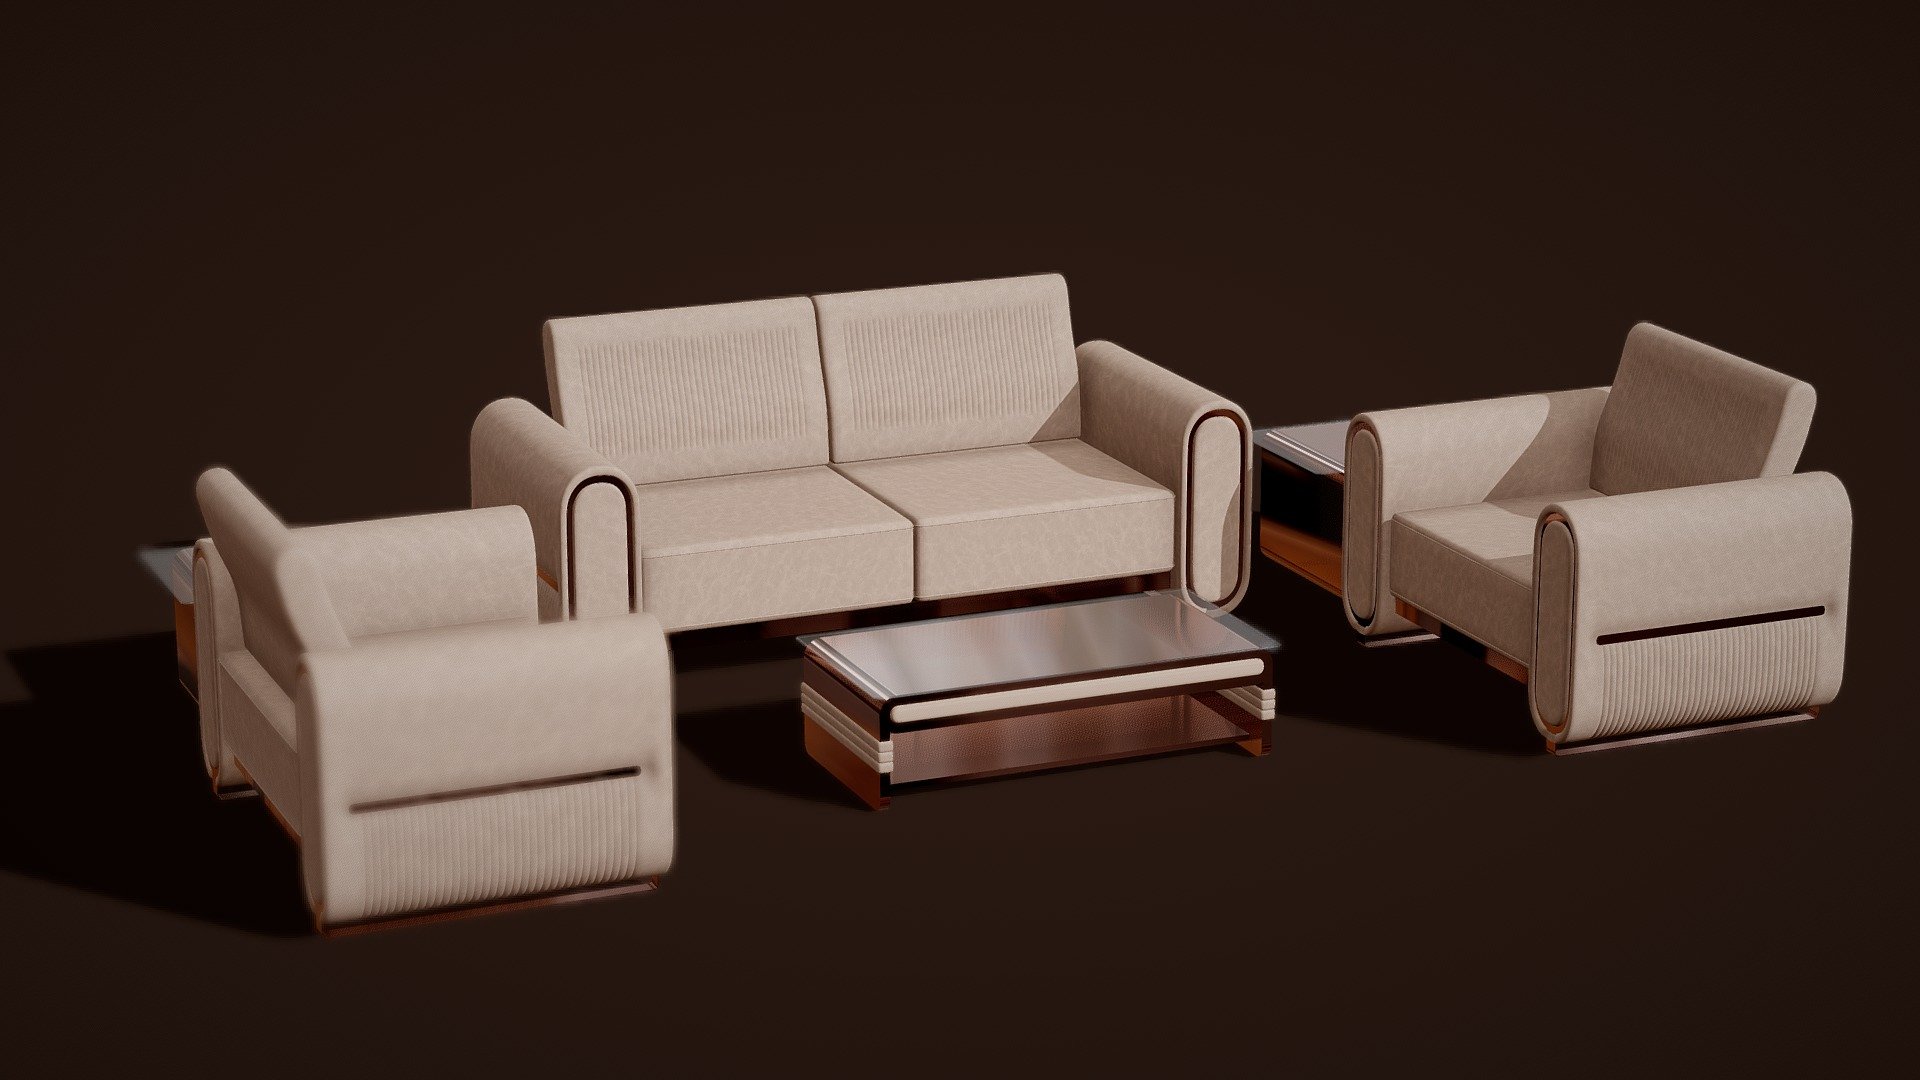 Thats a Sofa Set 04.
It includes 2 types of Sitting place &amp; 2 types of table. 
They can be rearranged to match the surroundings 3d model